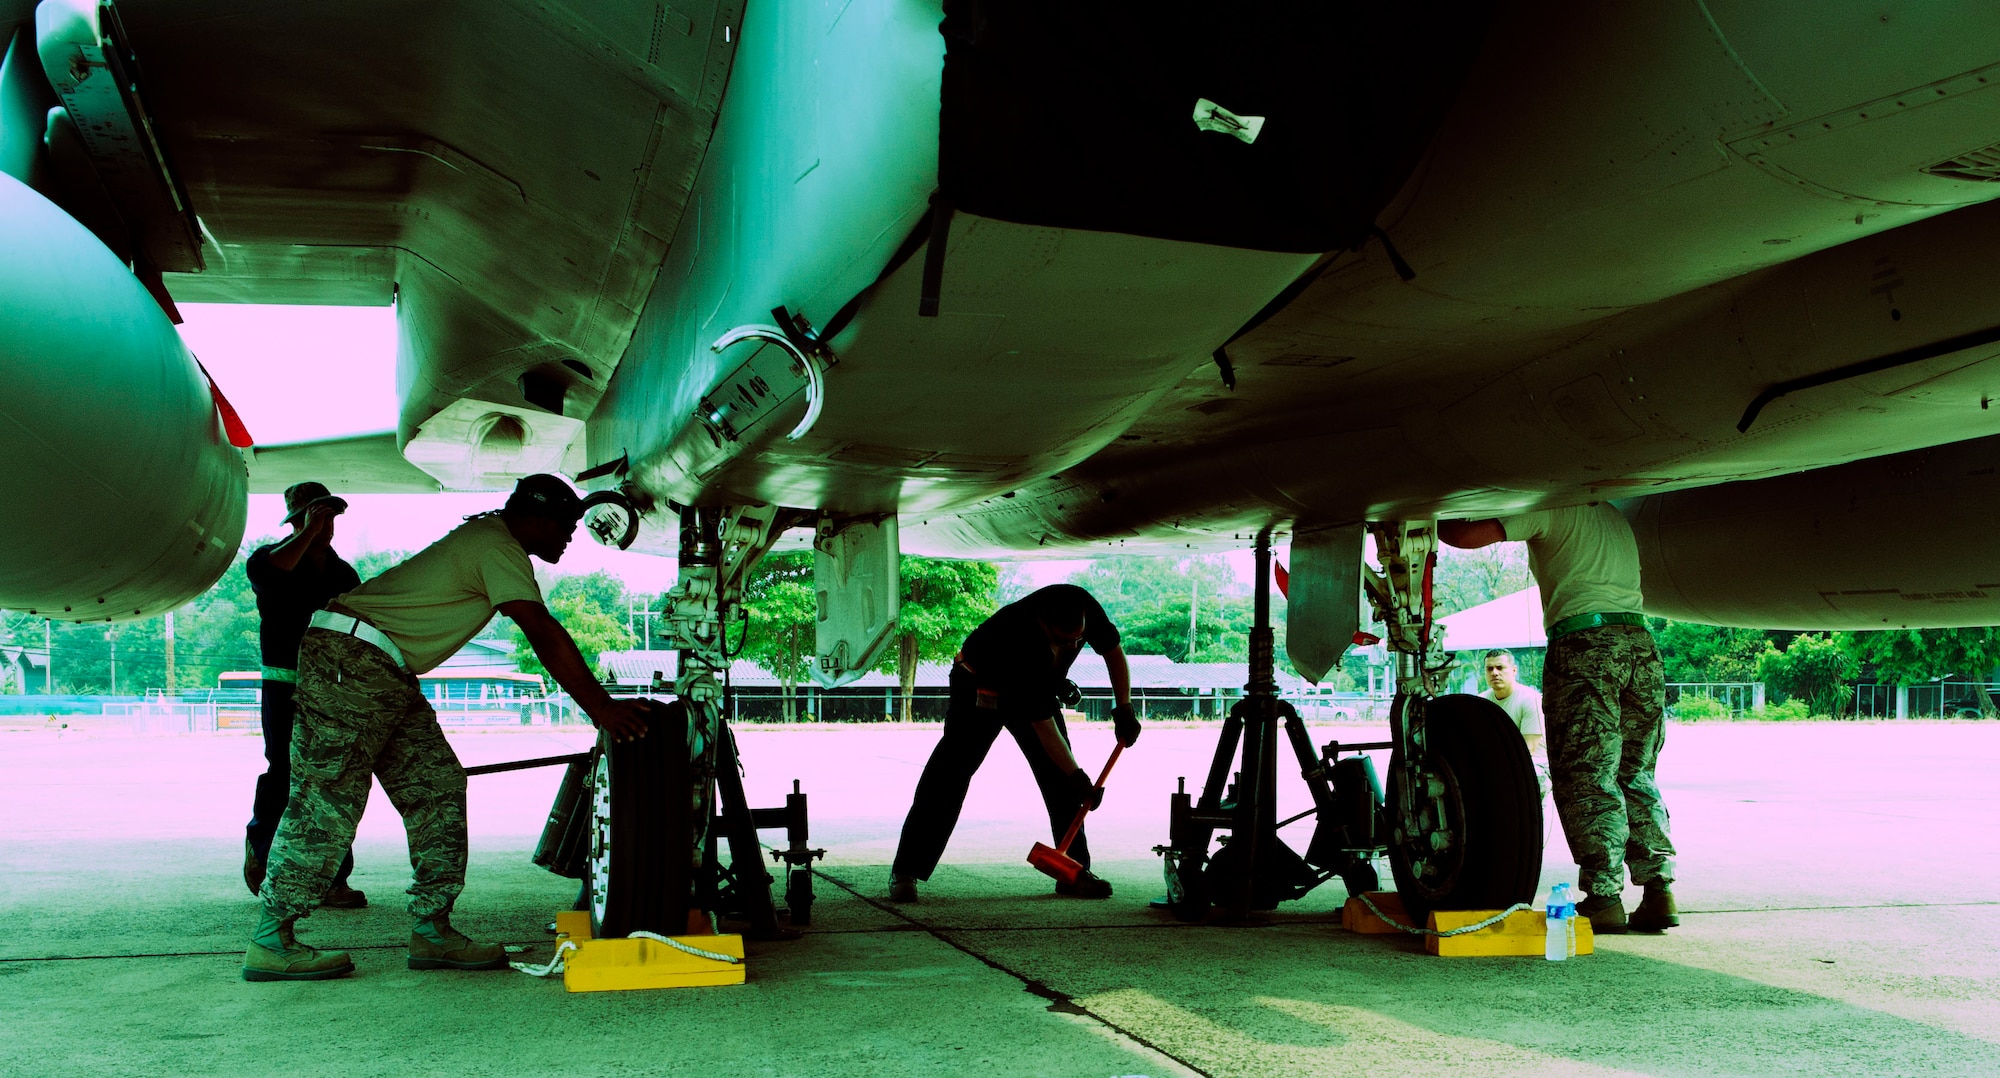 Maintainers from the 159th Fighter Wing, Louisiana Air National Guard, raise an F-15 Eagle on jacks to inspect a landing gear issue. Cope Tiger 2014 is an annual, multilateral aerial exercise in Thailand to improve combat readiness, interoperability and build relations among Thailand, Singapore and the United States. (U.S. Air Force photo by 2Lt. Michael Harrington/Released)